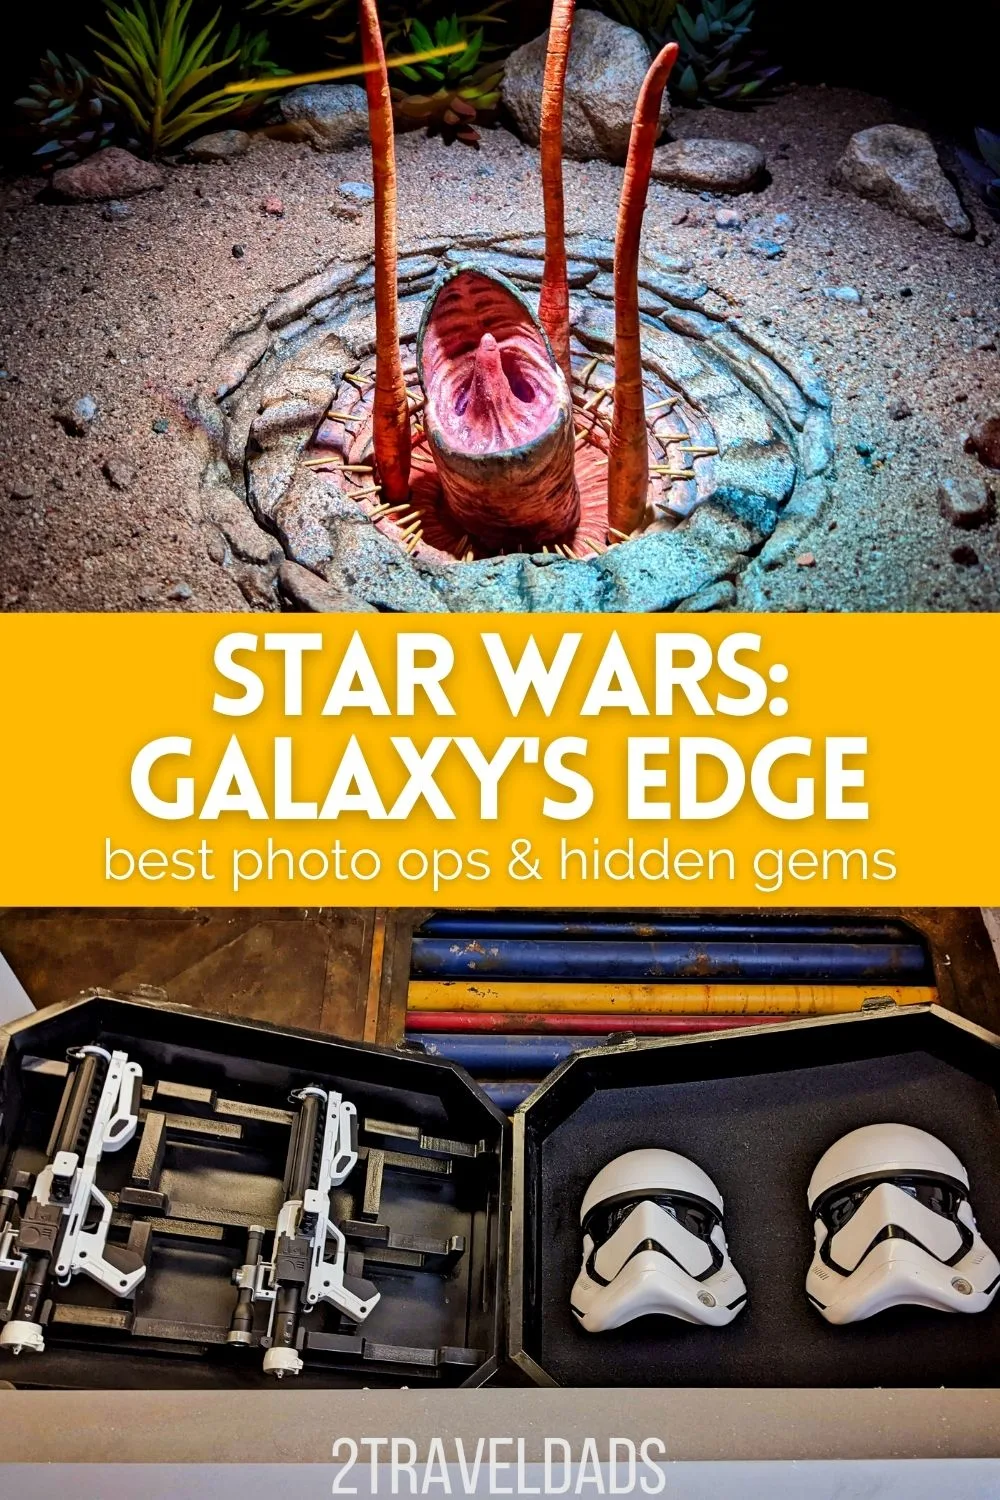 There are many hidden gems in Star Wars: Galaxy's Edge that big fans will notice. From interesting art to obscure Star Wars references these are our favorite finds in Star Wars land at Disney World. (And a scavenger hunt too!)